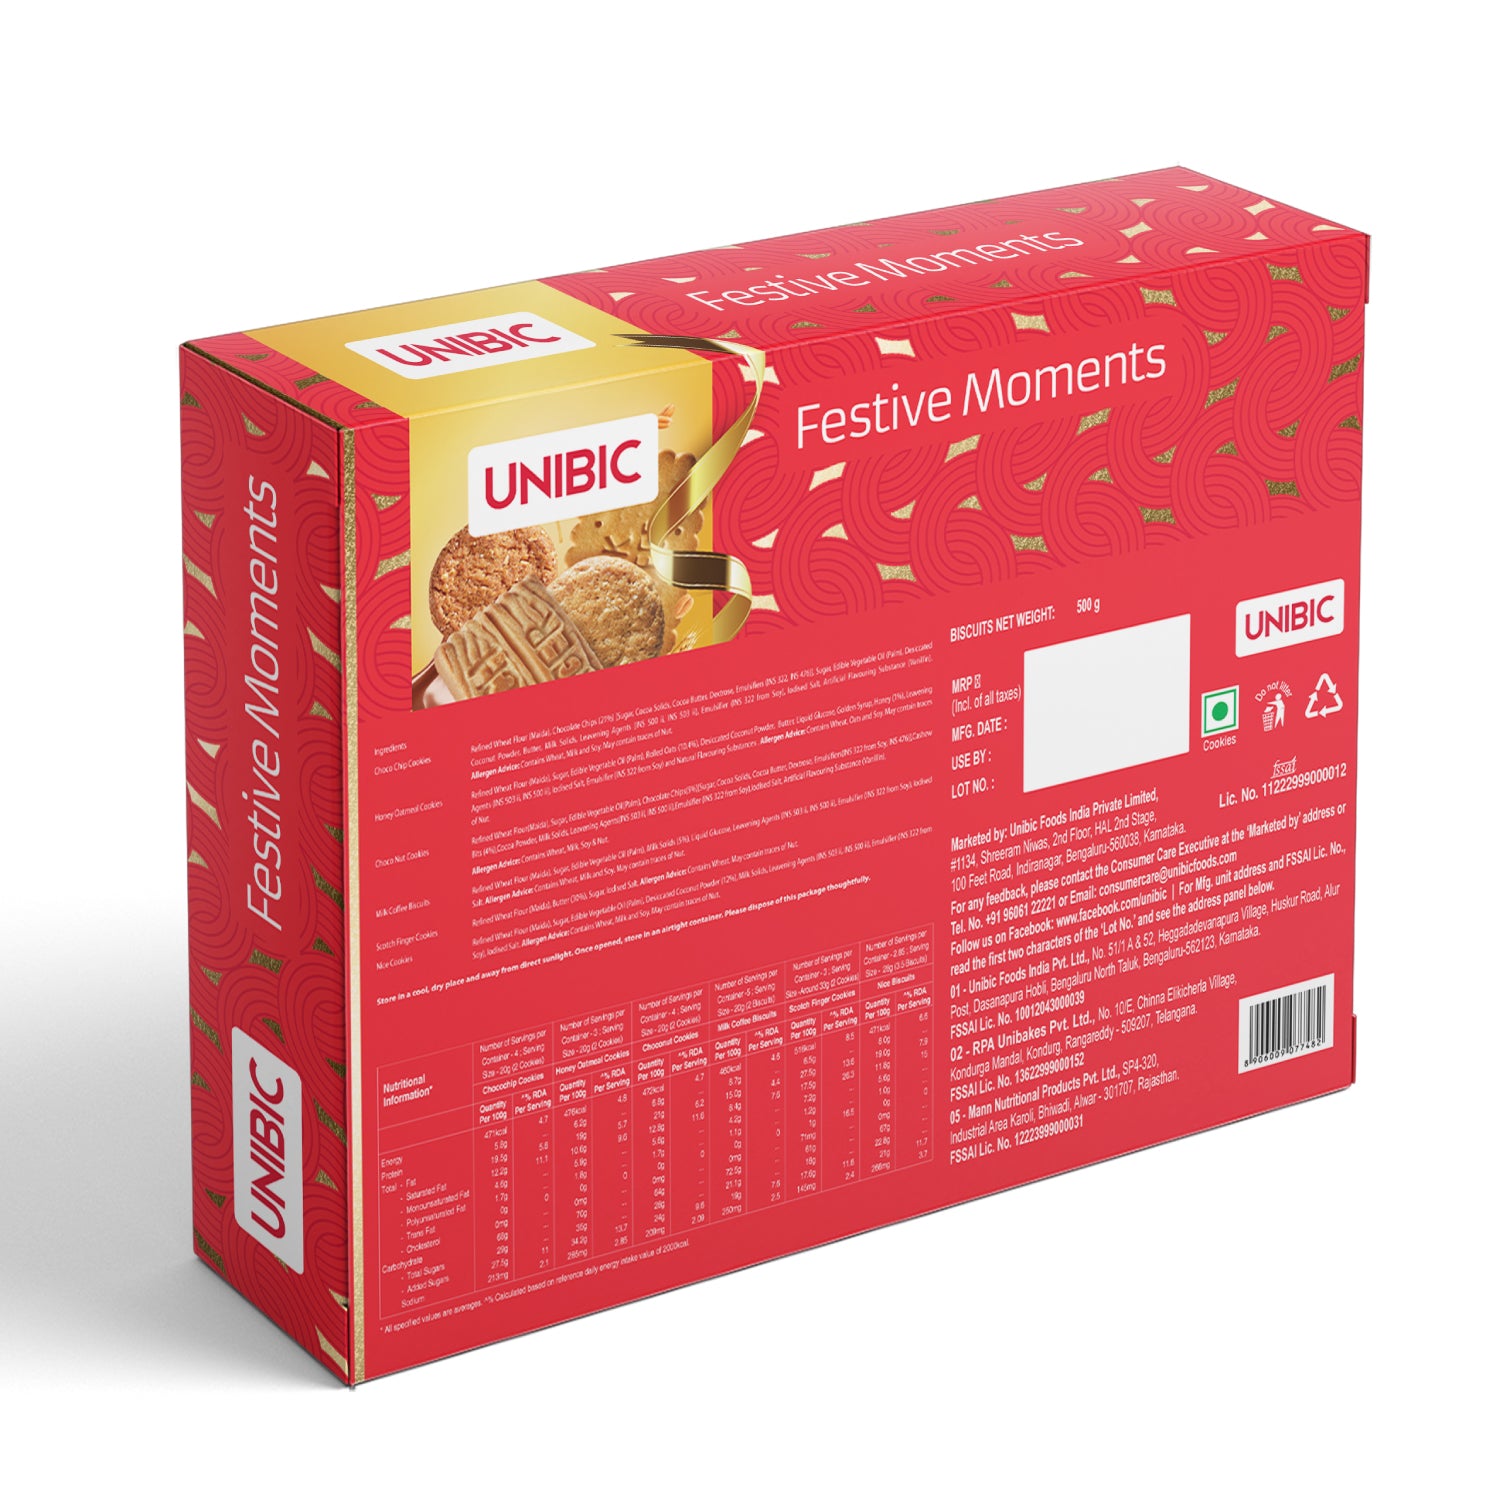 FESTIVE MOMENTS Gift Pack, 500 Gms – Unibicestore